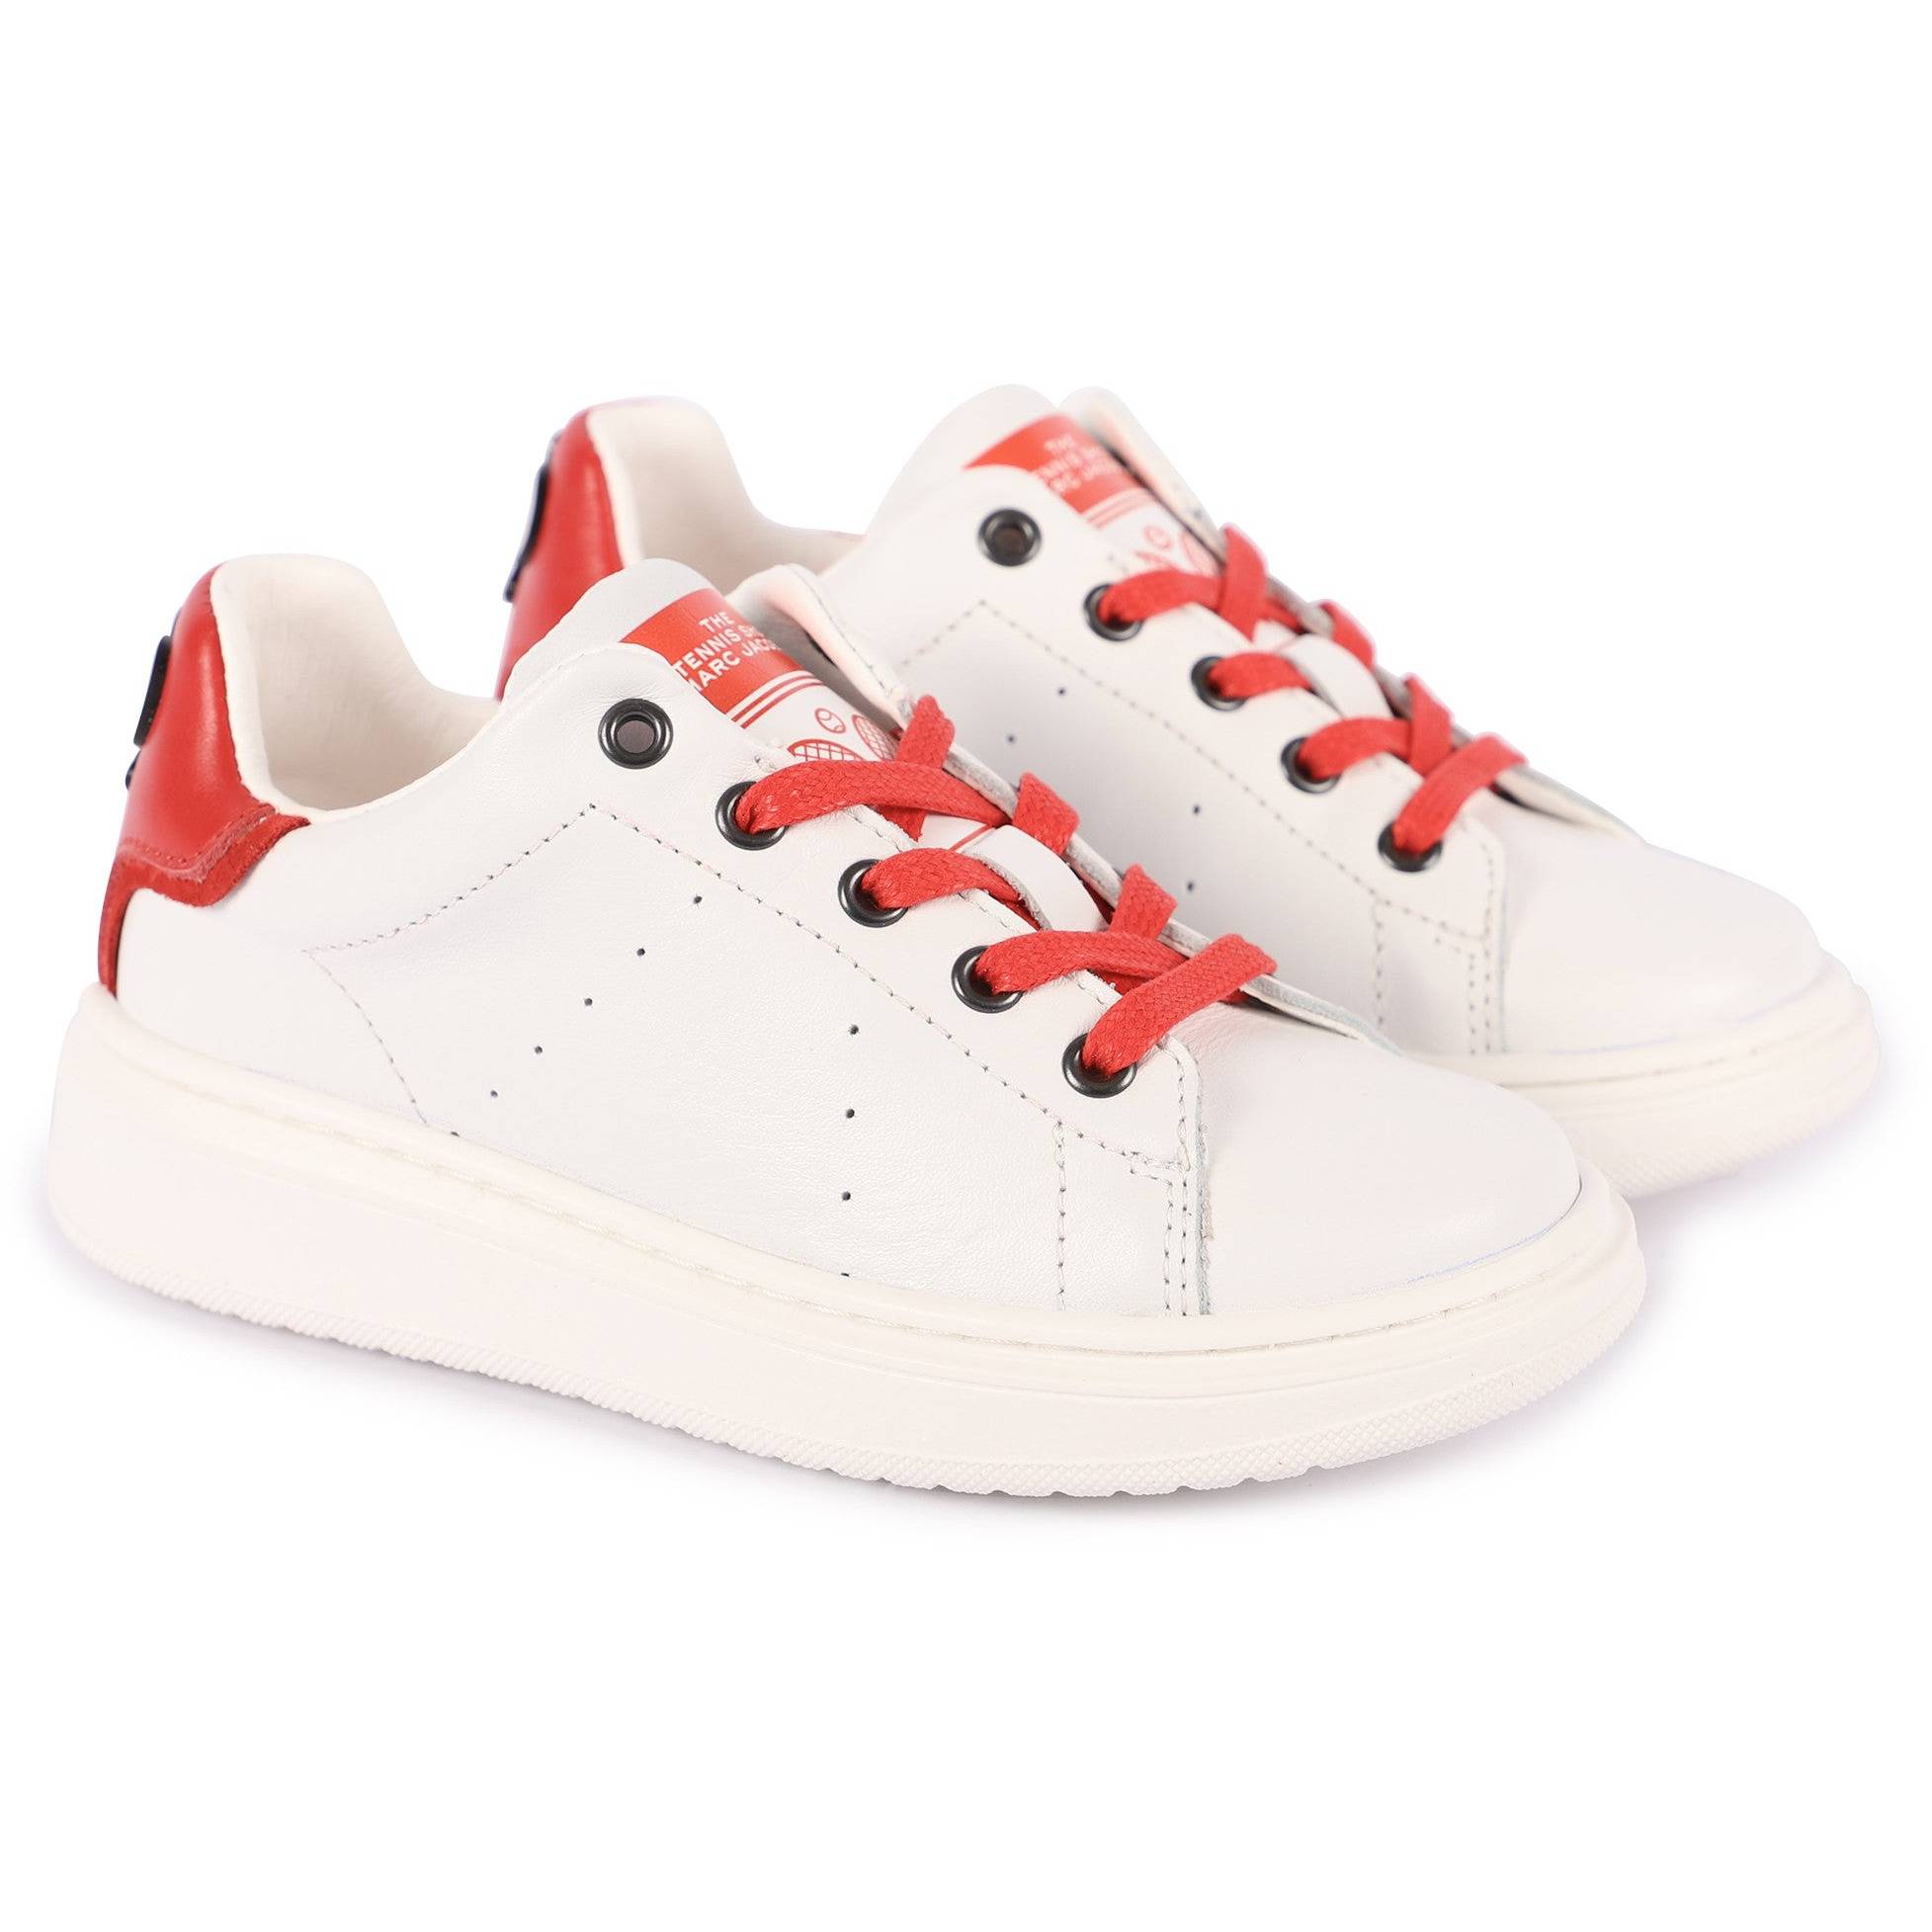 LOGO LEATHER SNEAKERS IN WHITE AND RED